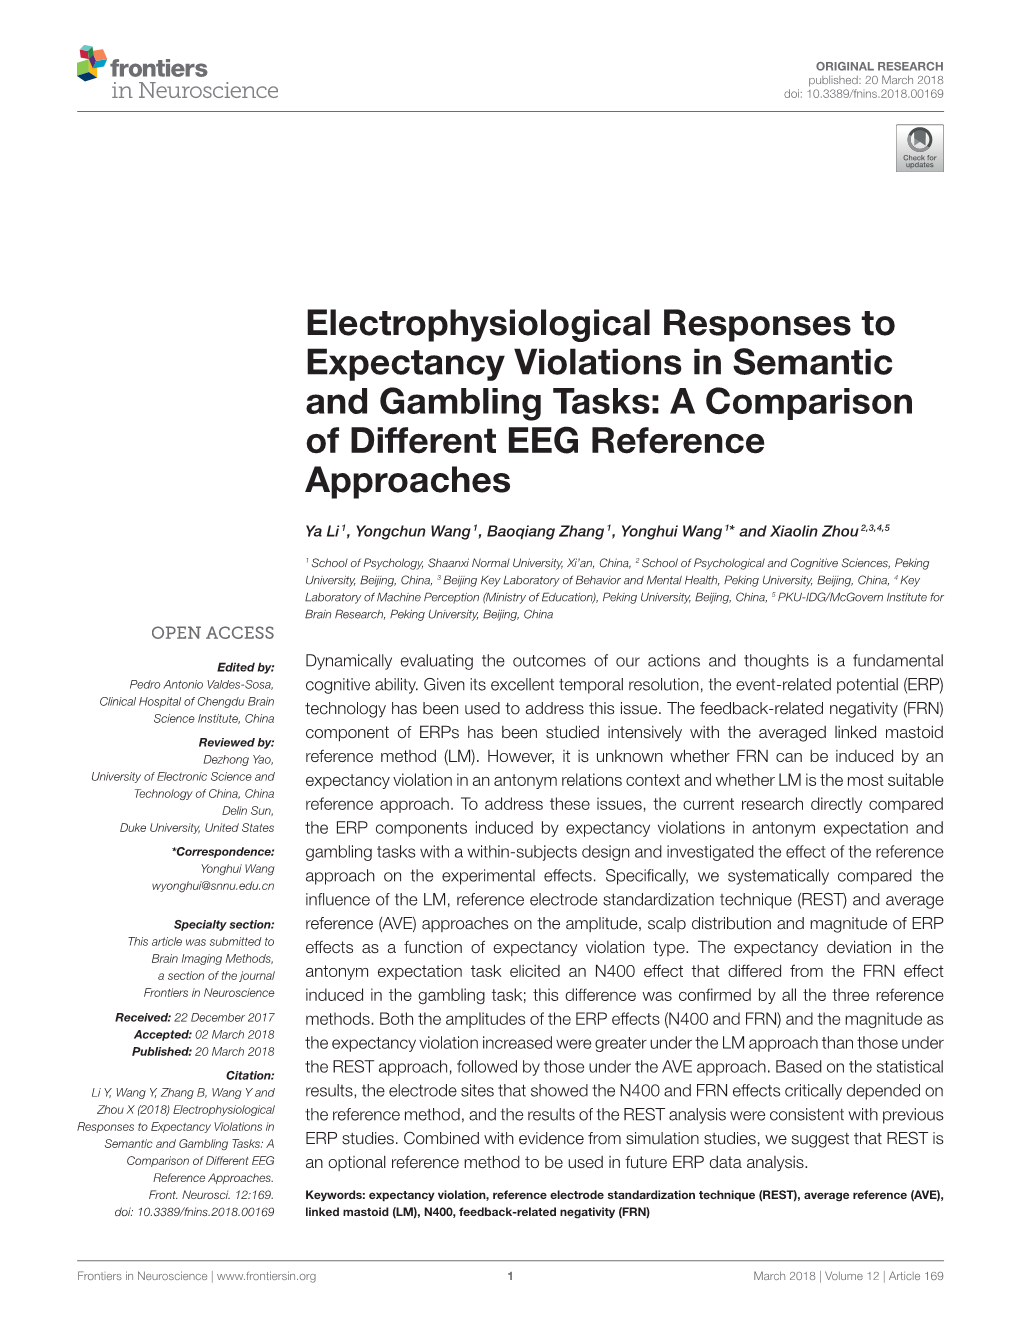 Electrophysiological Responses to Expectancy Violations in Semantic and Gambling Tasks: a Comparison of Different EEG Reference Approaches